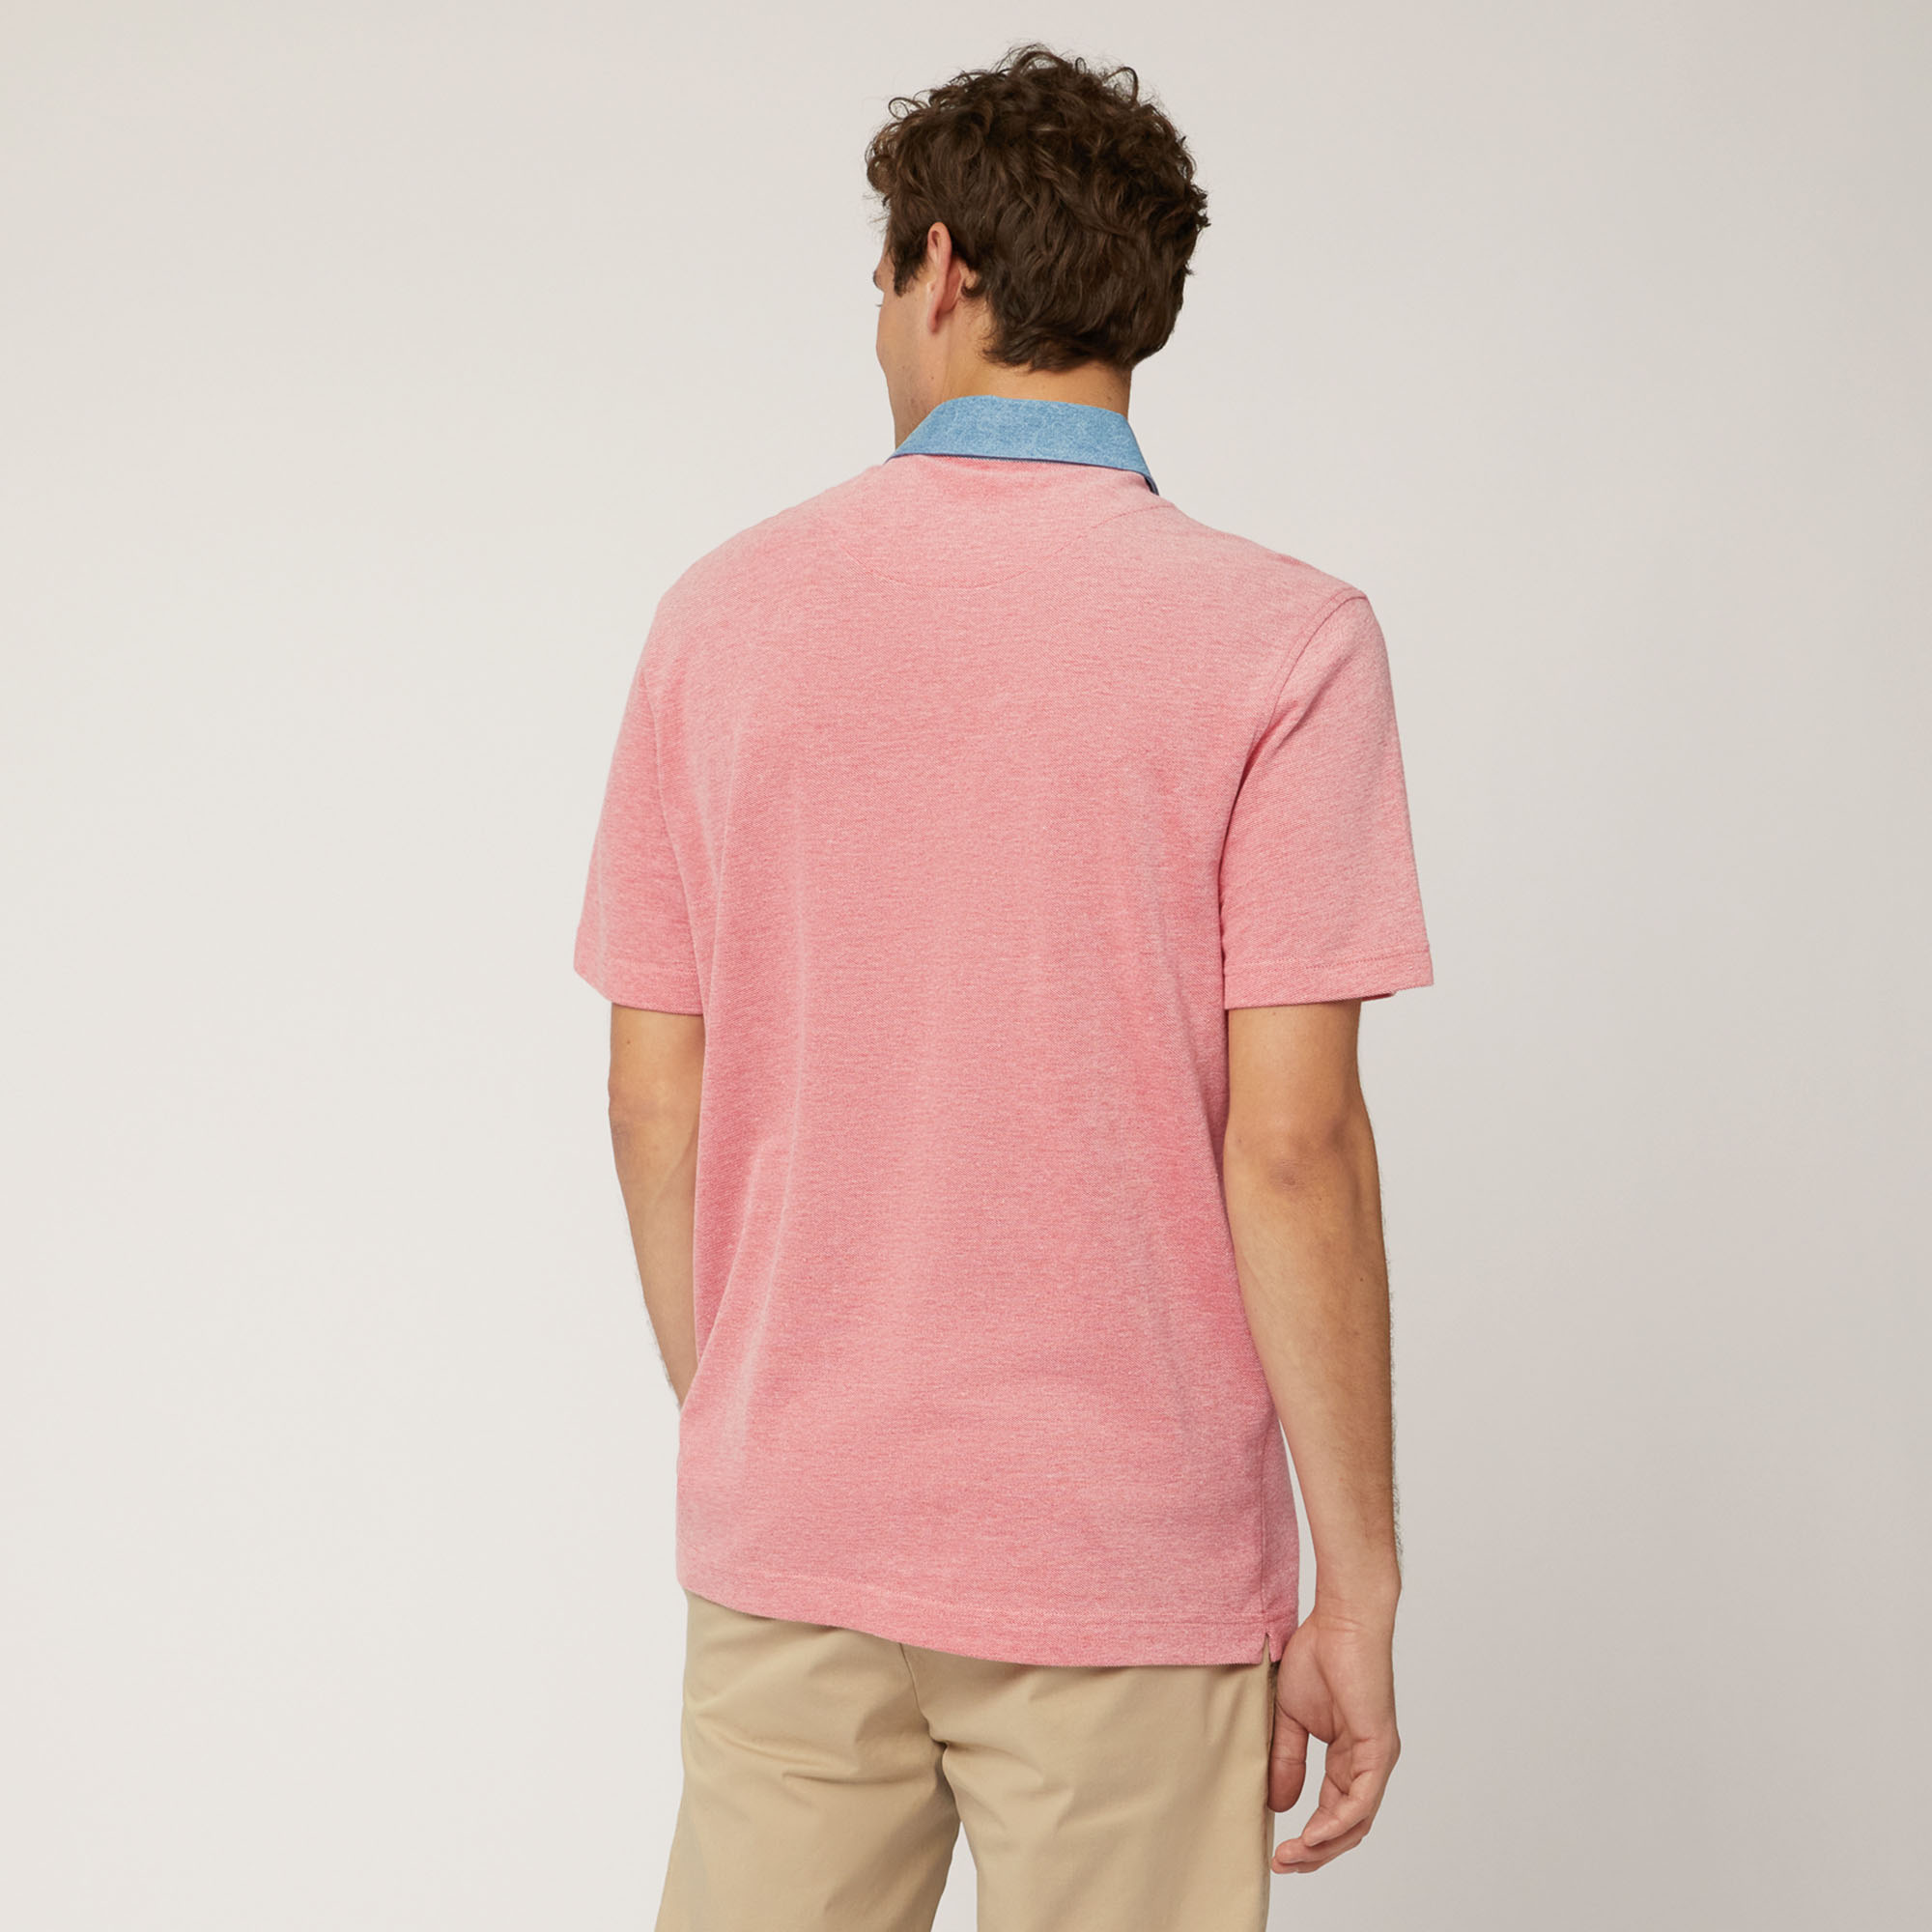 Oxford Cotton Vietri Polo, Light Red, large image number 1